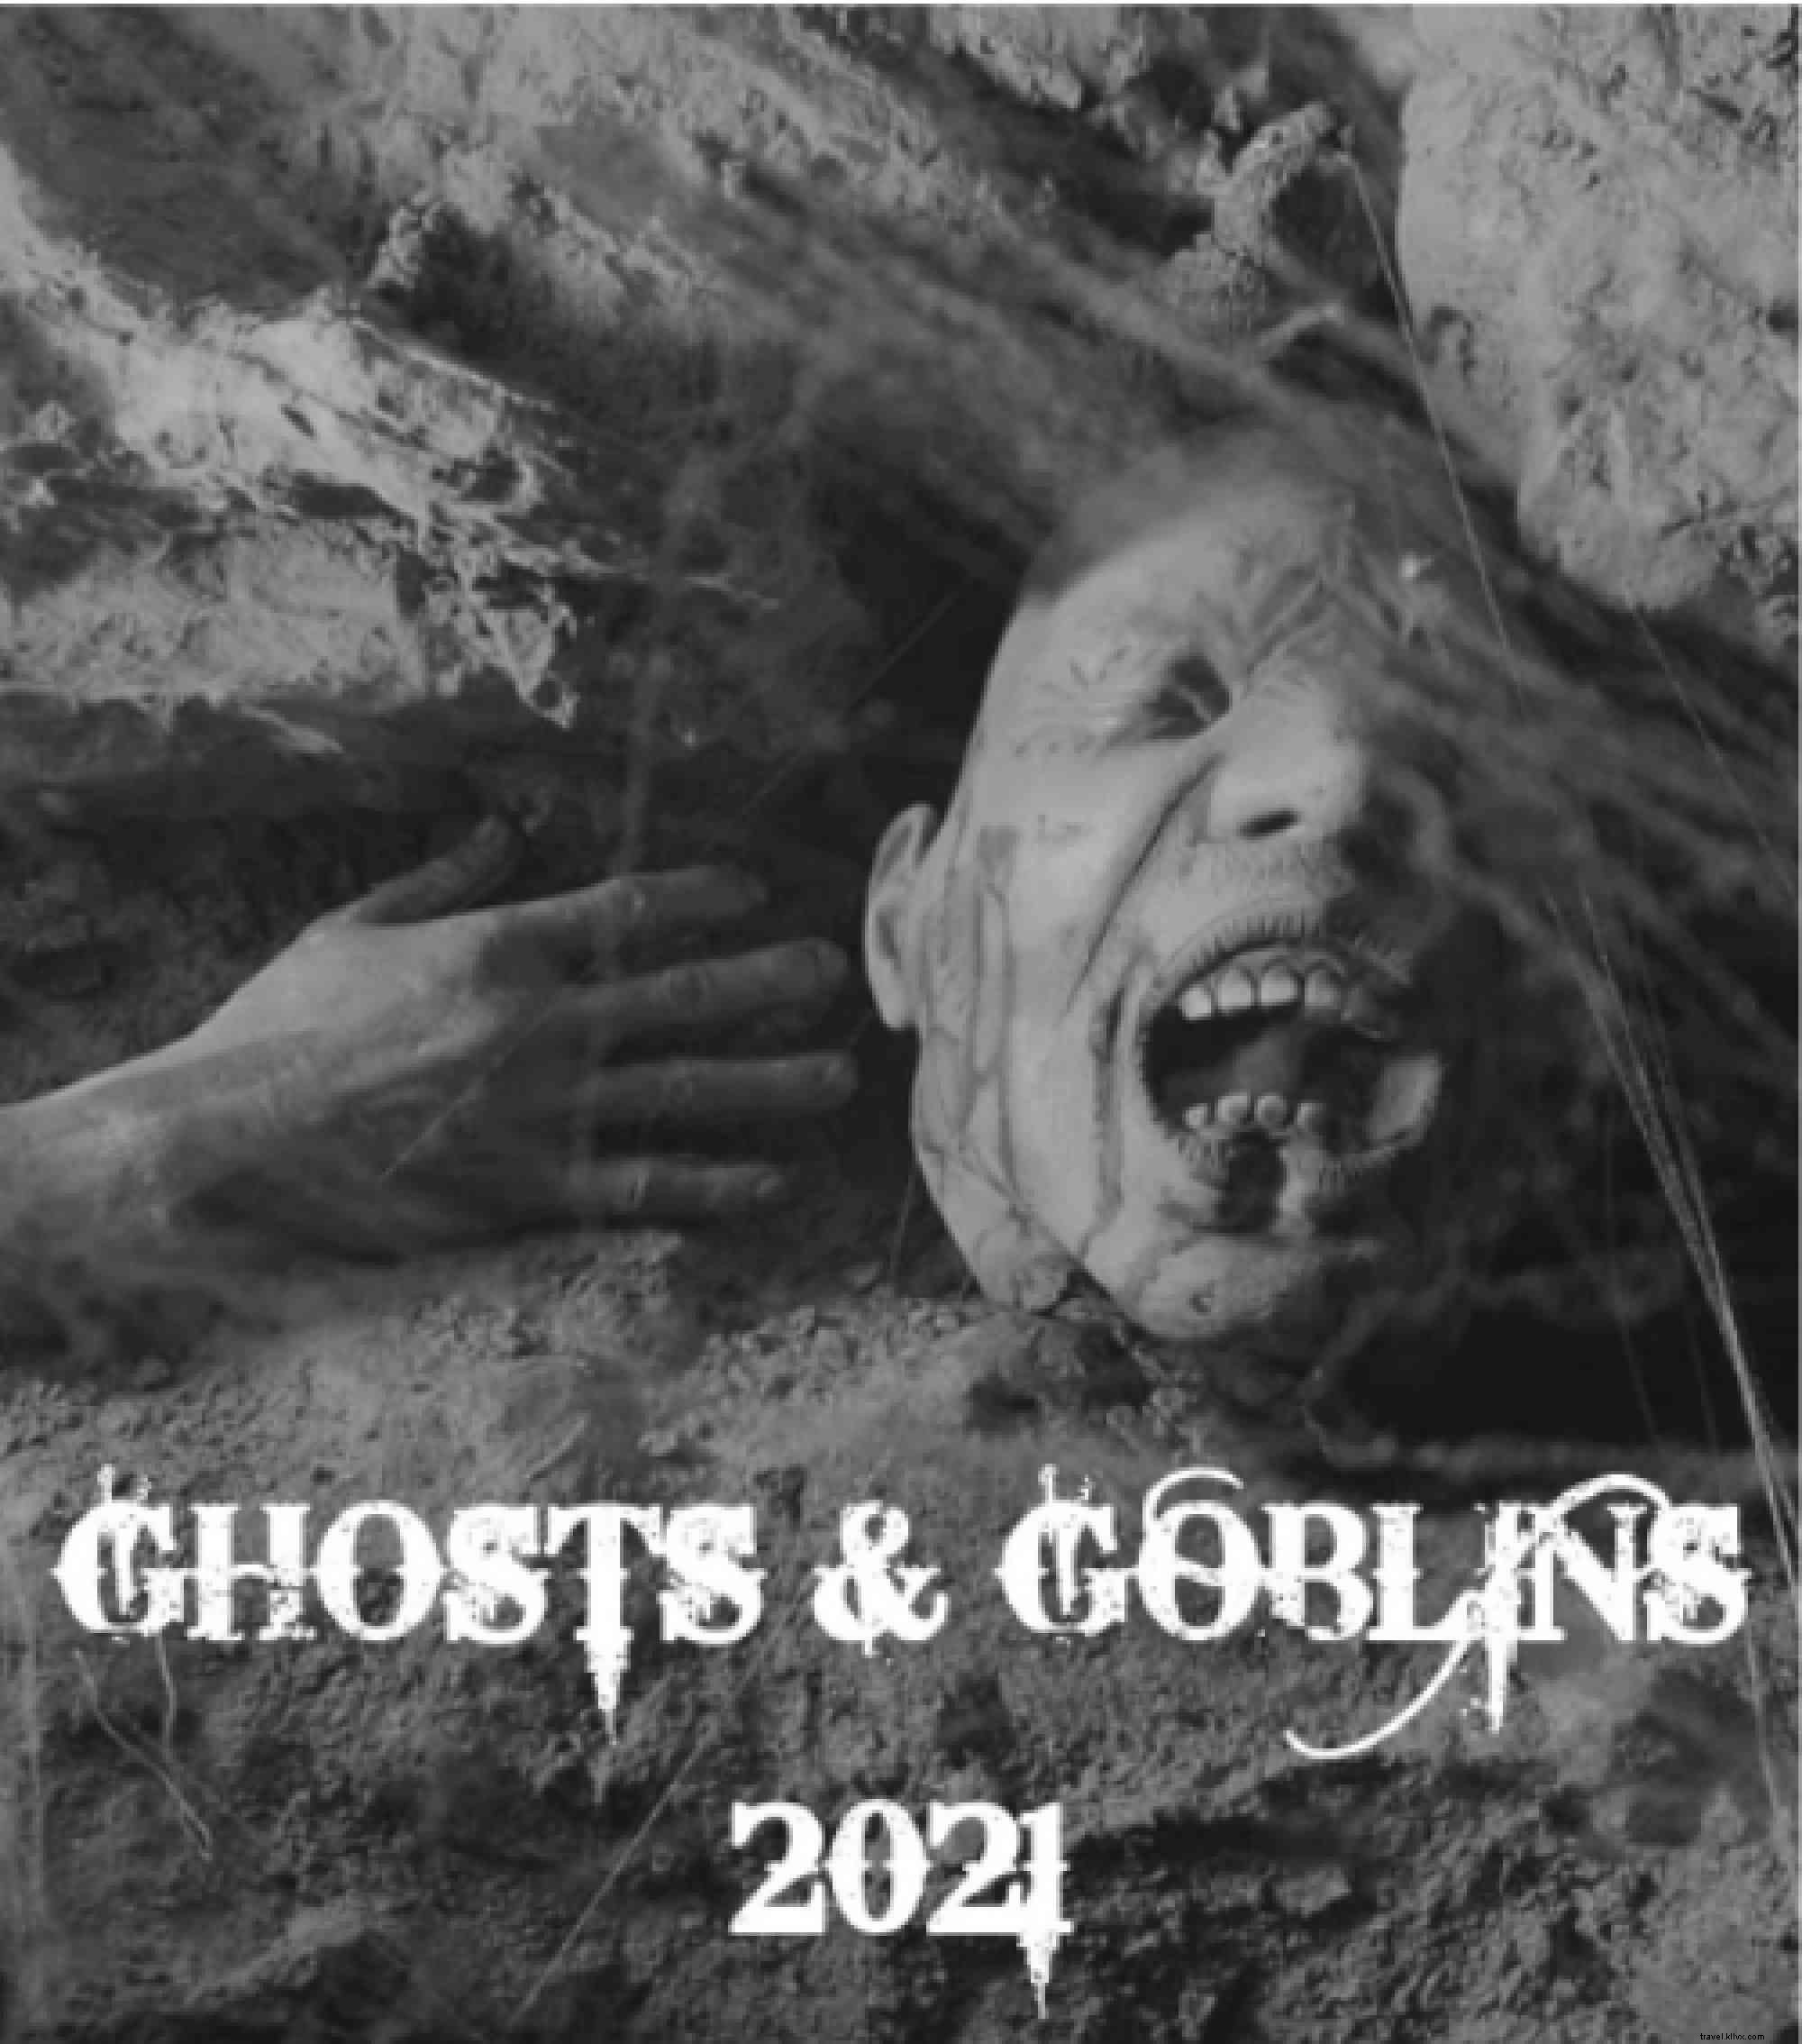 incoln Caverns 38th Annual Ghosts and Goblins 2021 